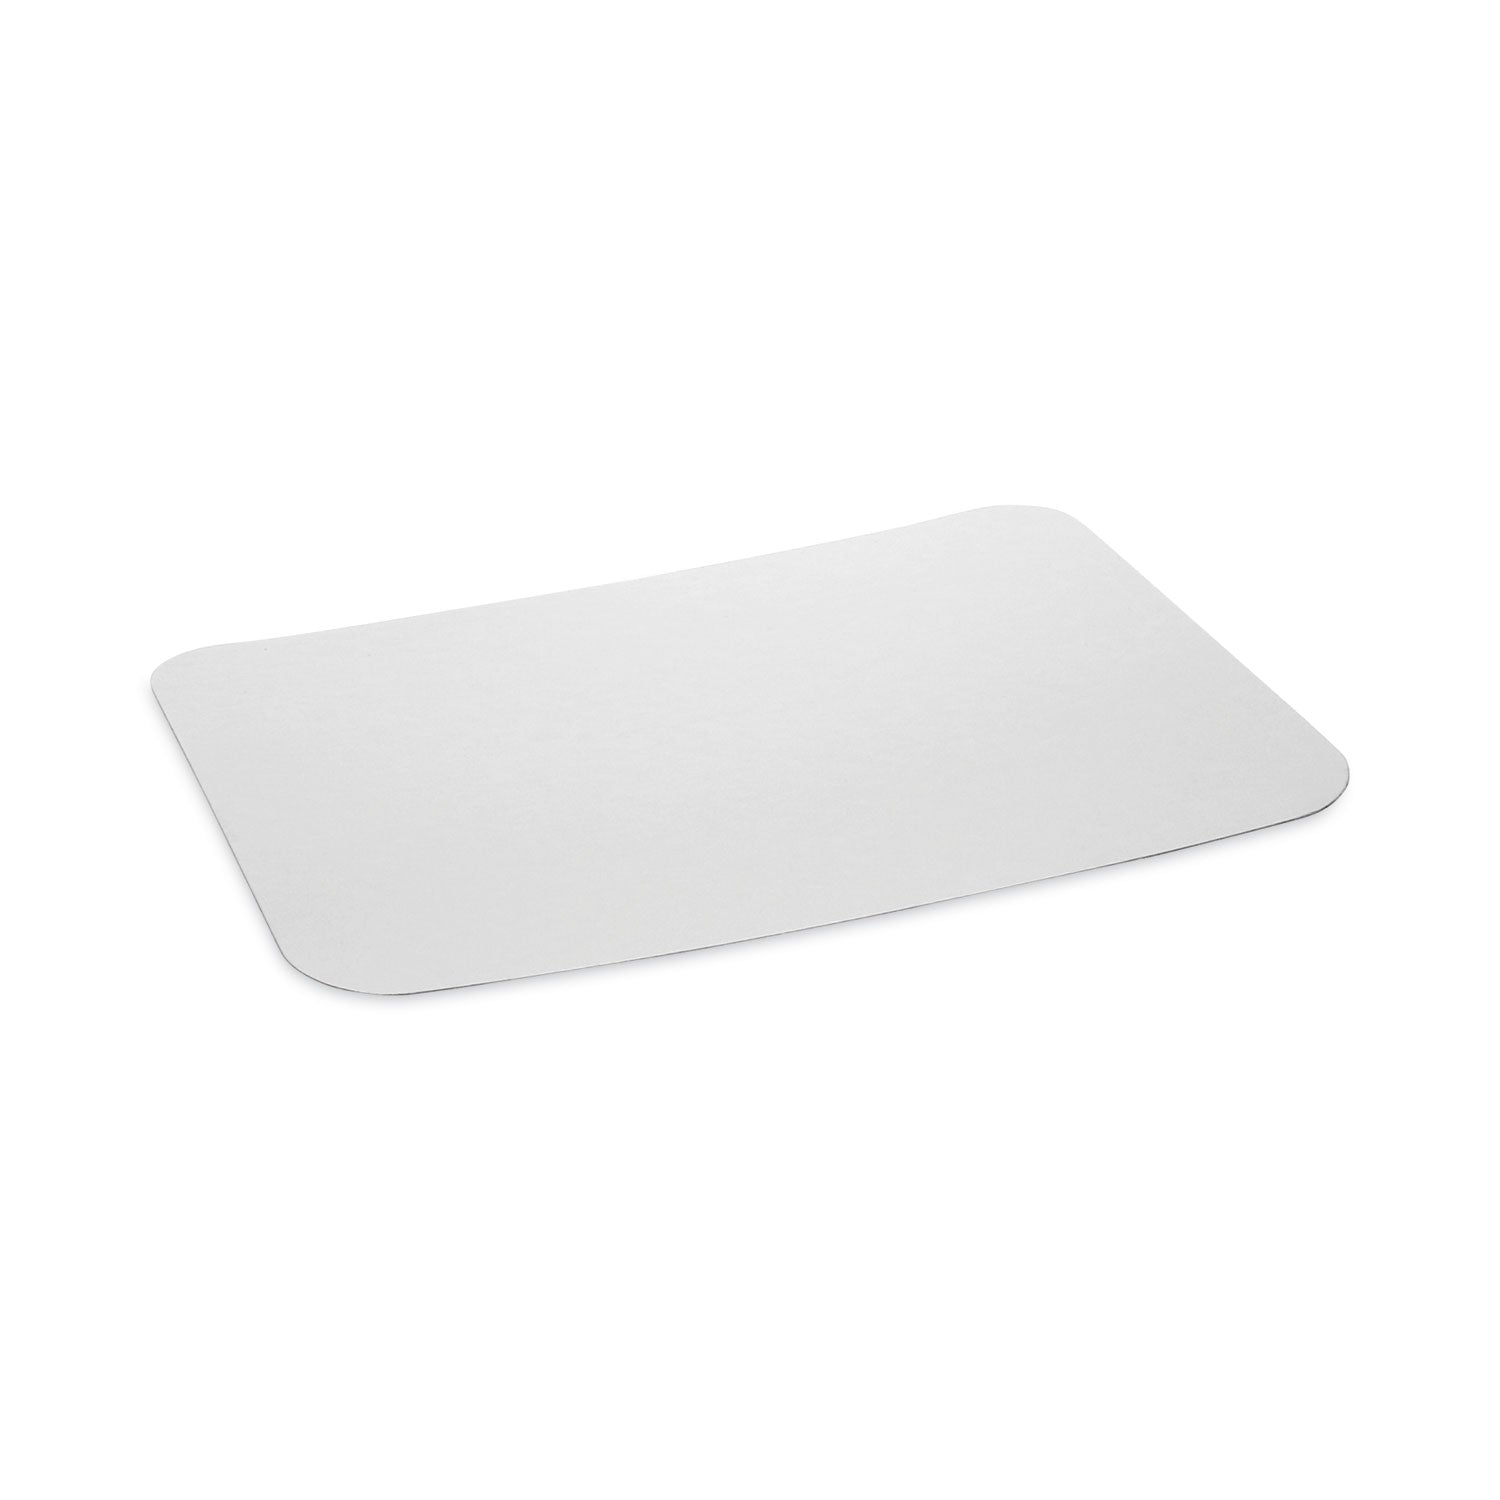 aluminum-take-out-container-lid-loaf-pan-lid-84-x-59-white-aluminum-400-carton_pctyl788 - 1